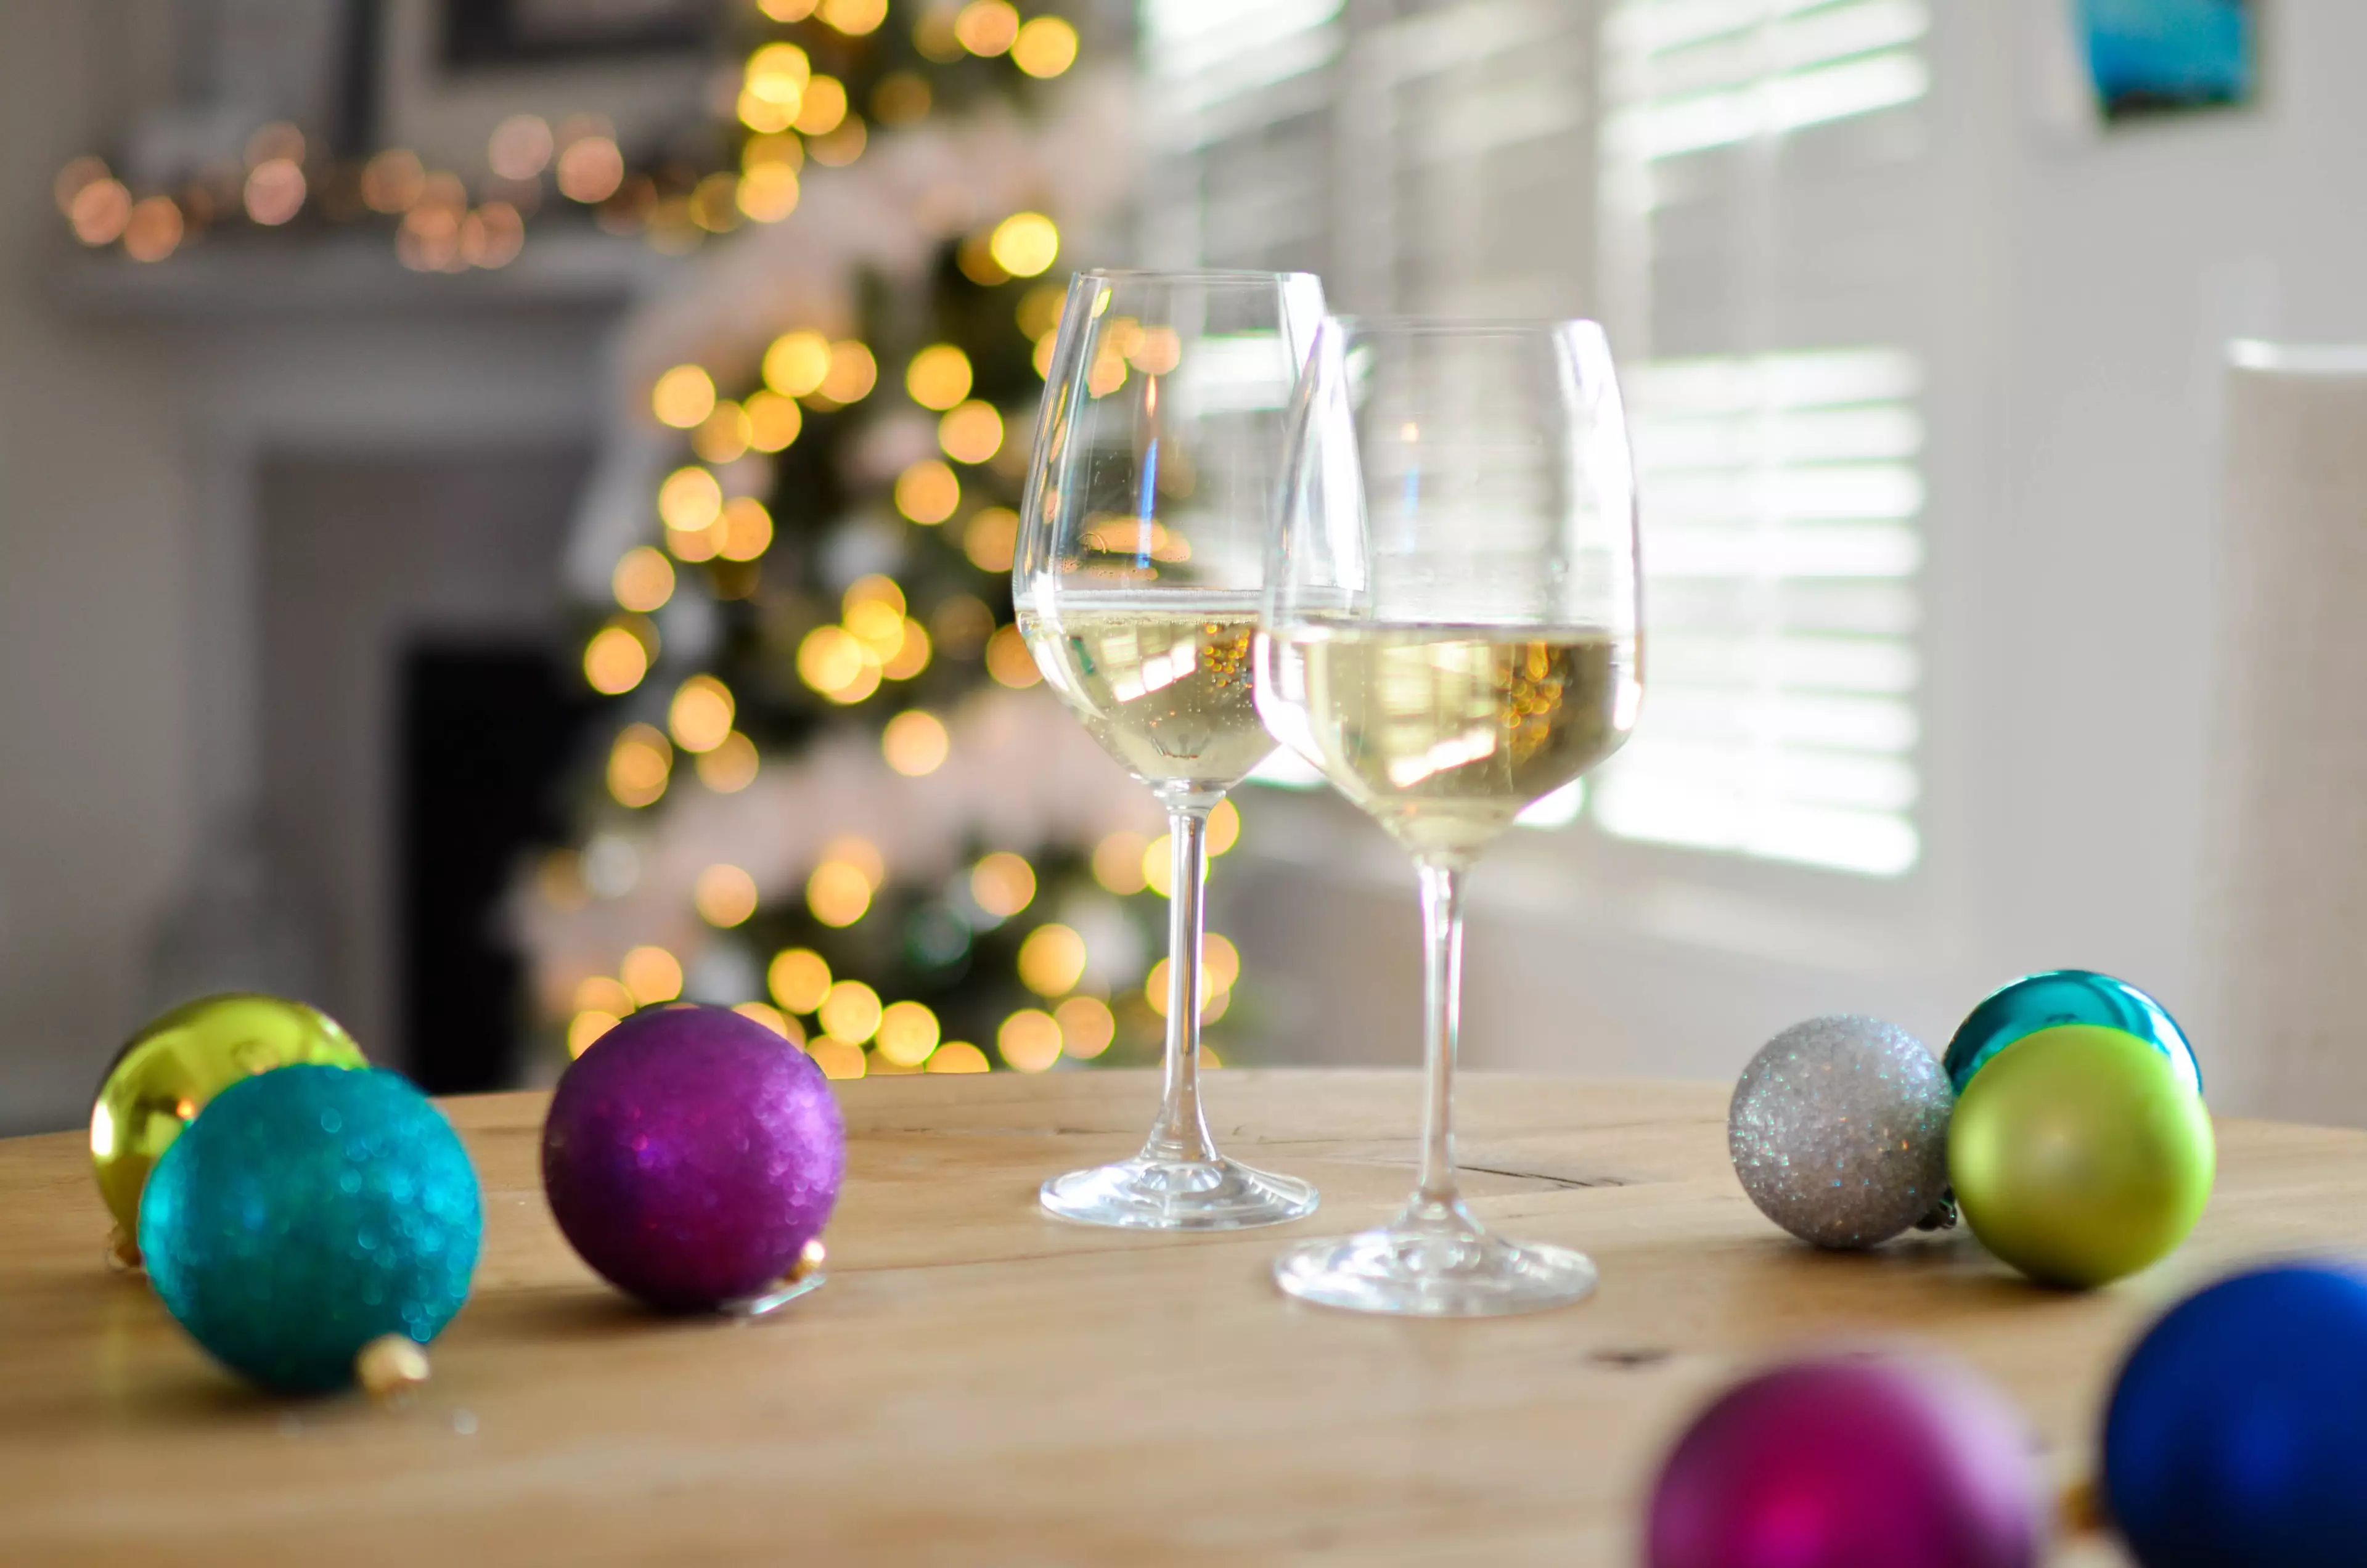 An extended Easter break means more time to snack on chocolates and drink wine, right? (